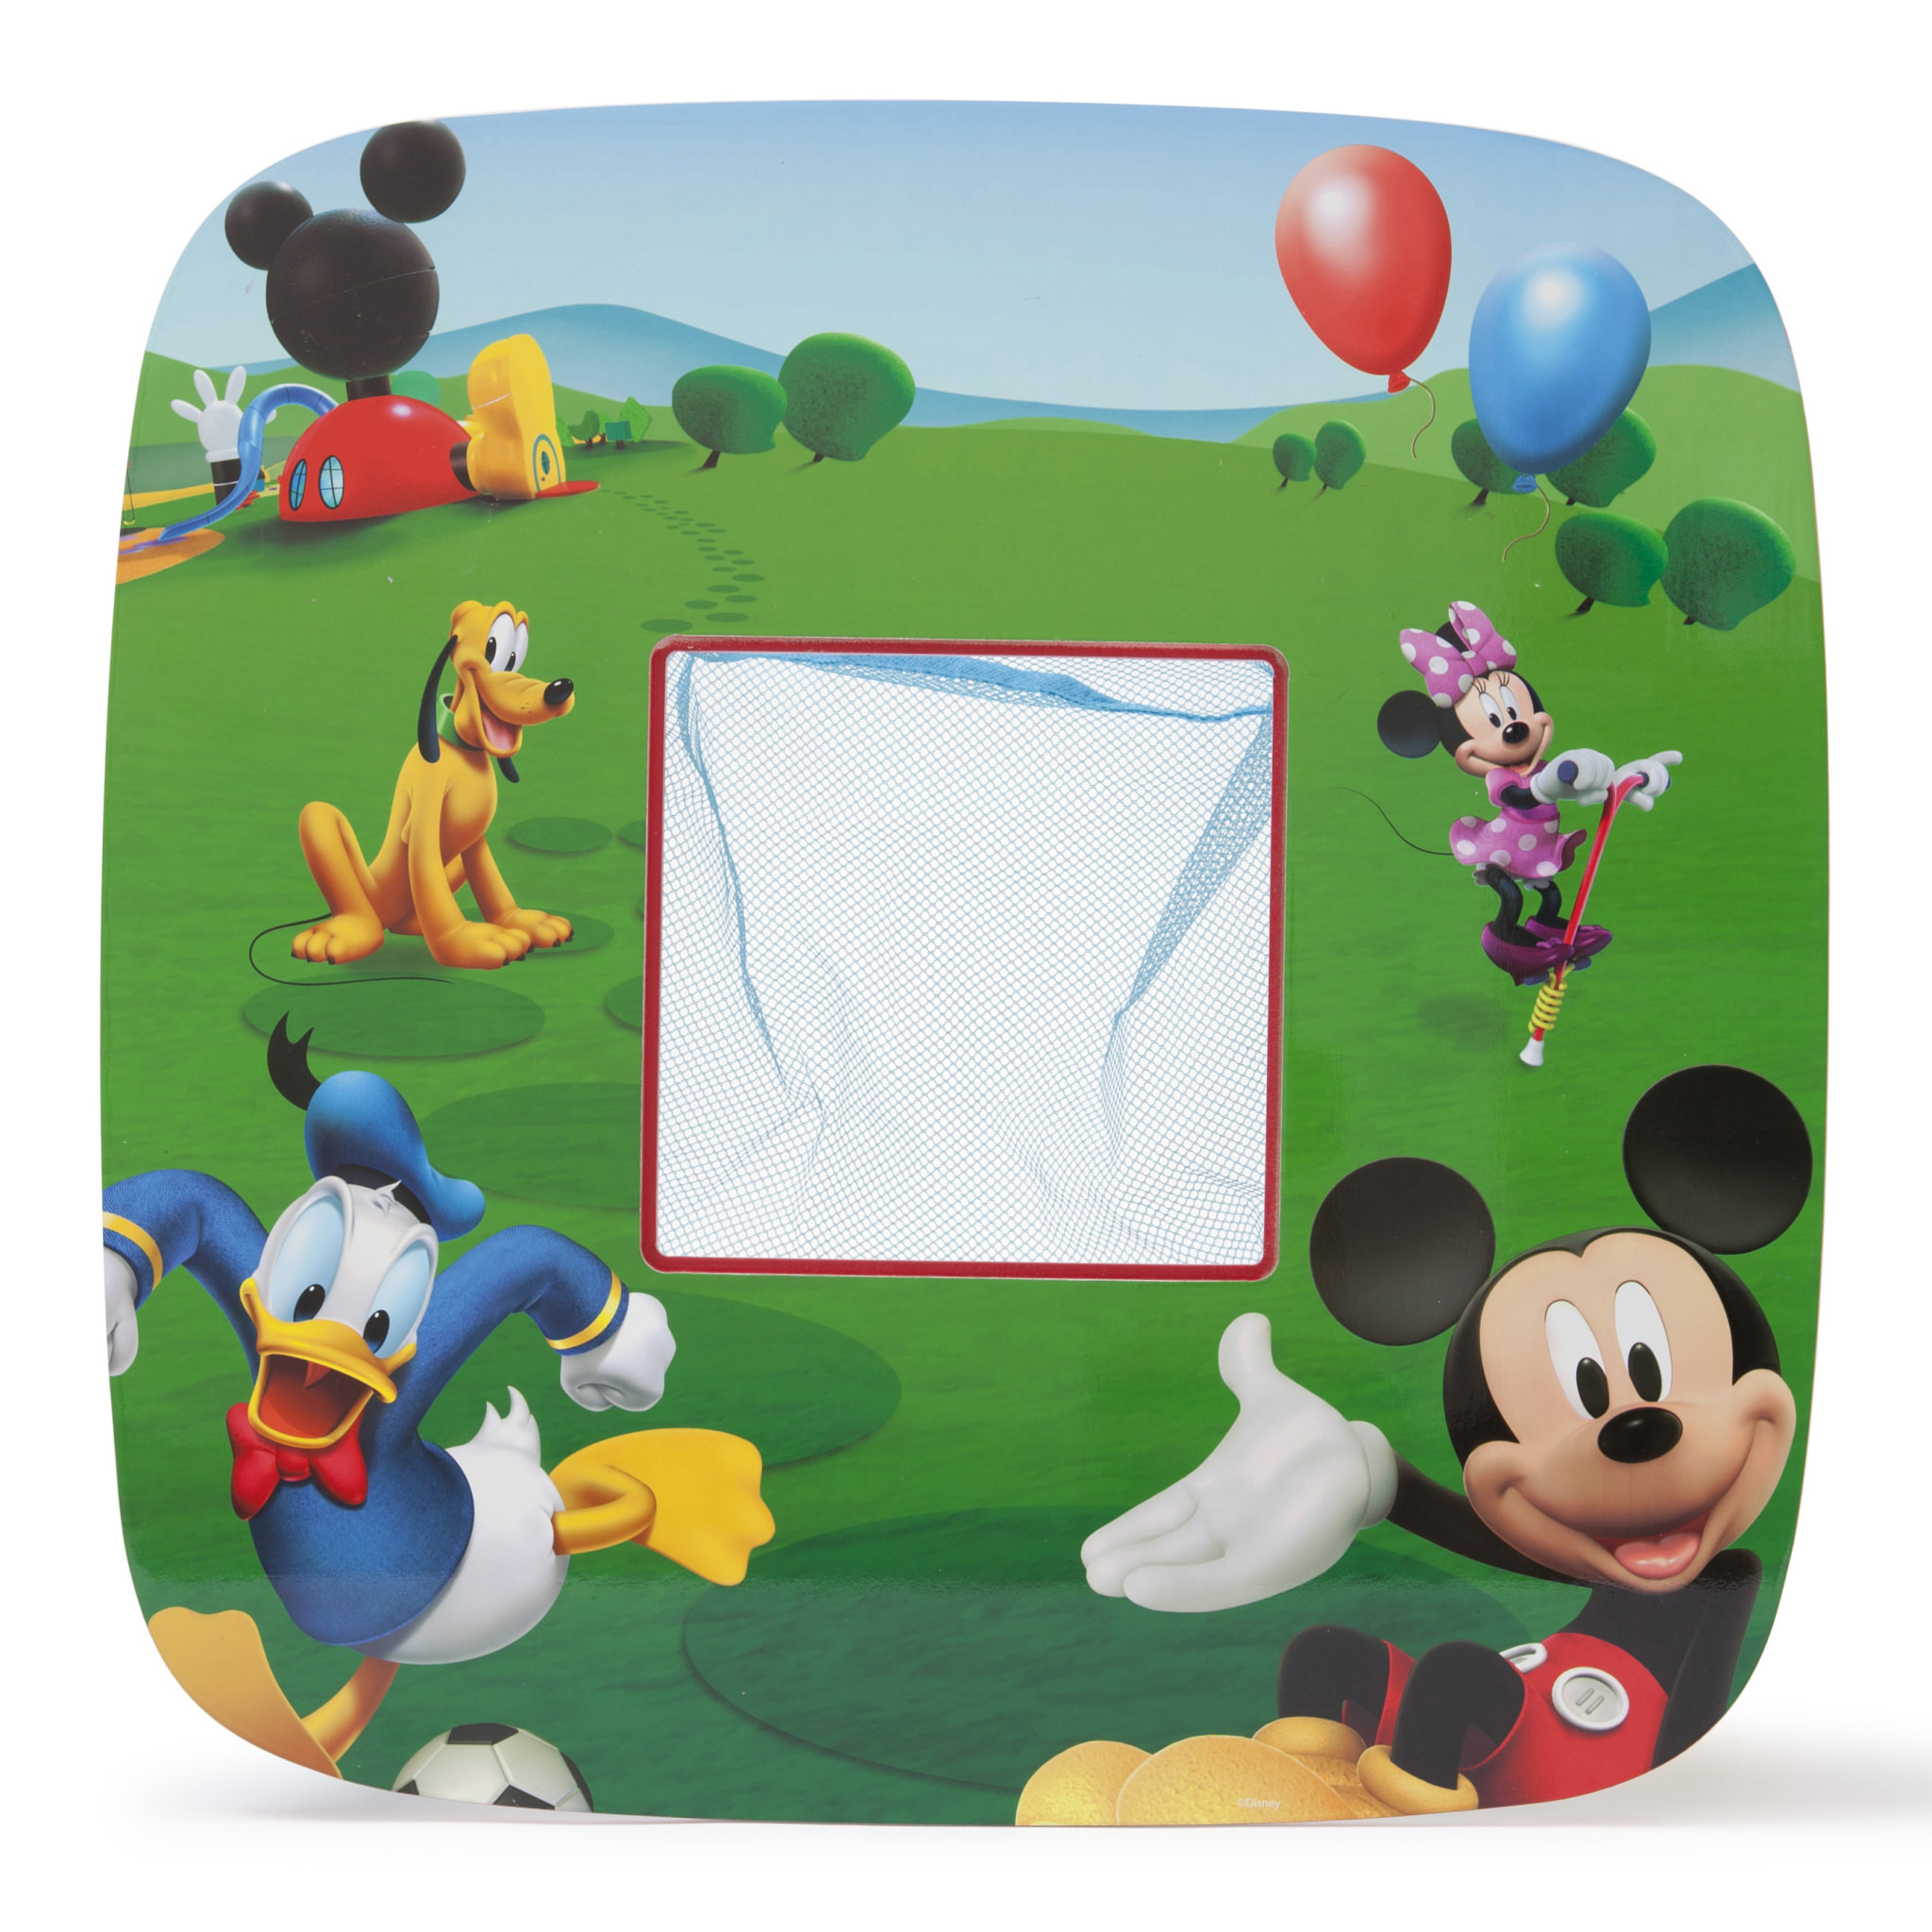 Disney Mickey Mouse Wood Kids Storage Table and Chairs Set by Delta Children - image 4 of 5